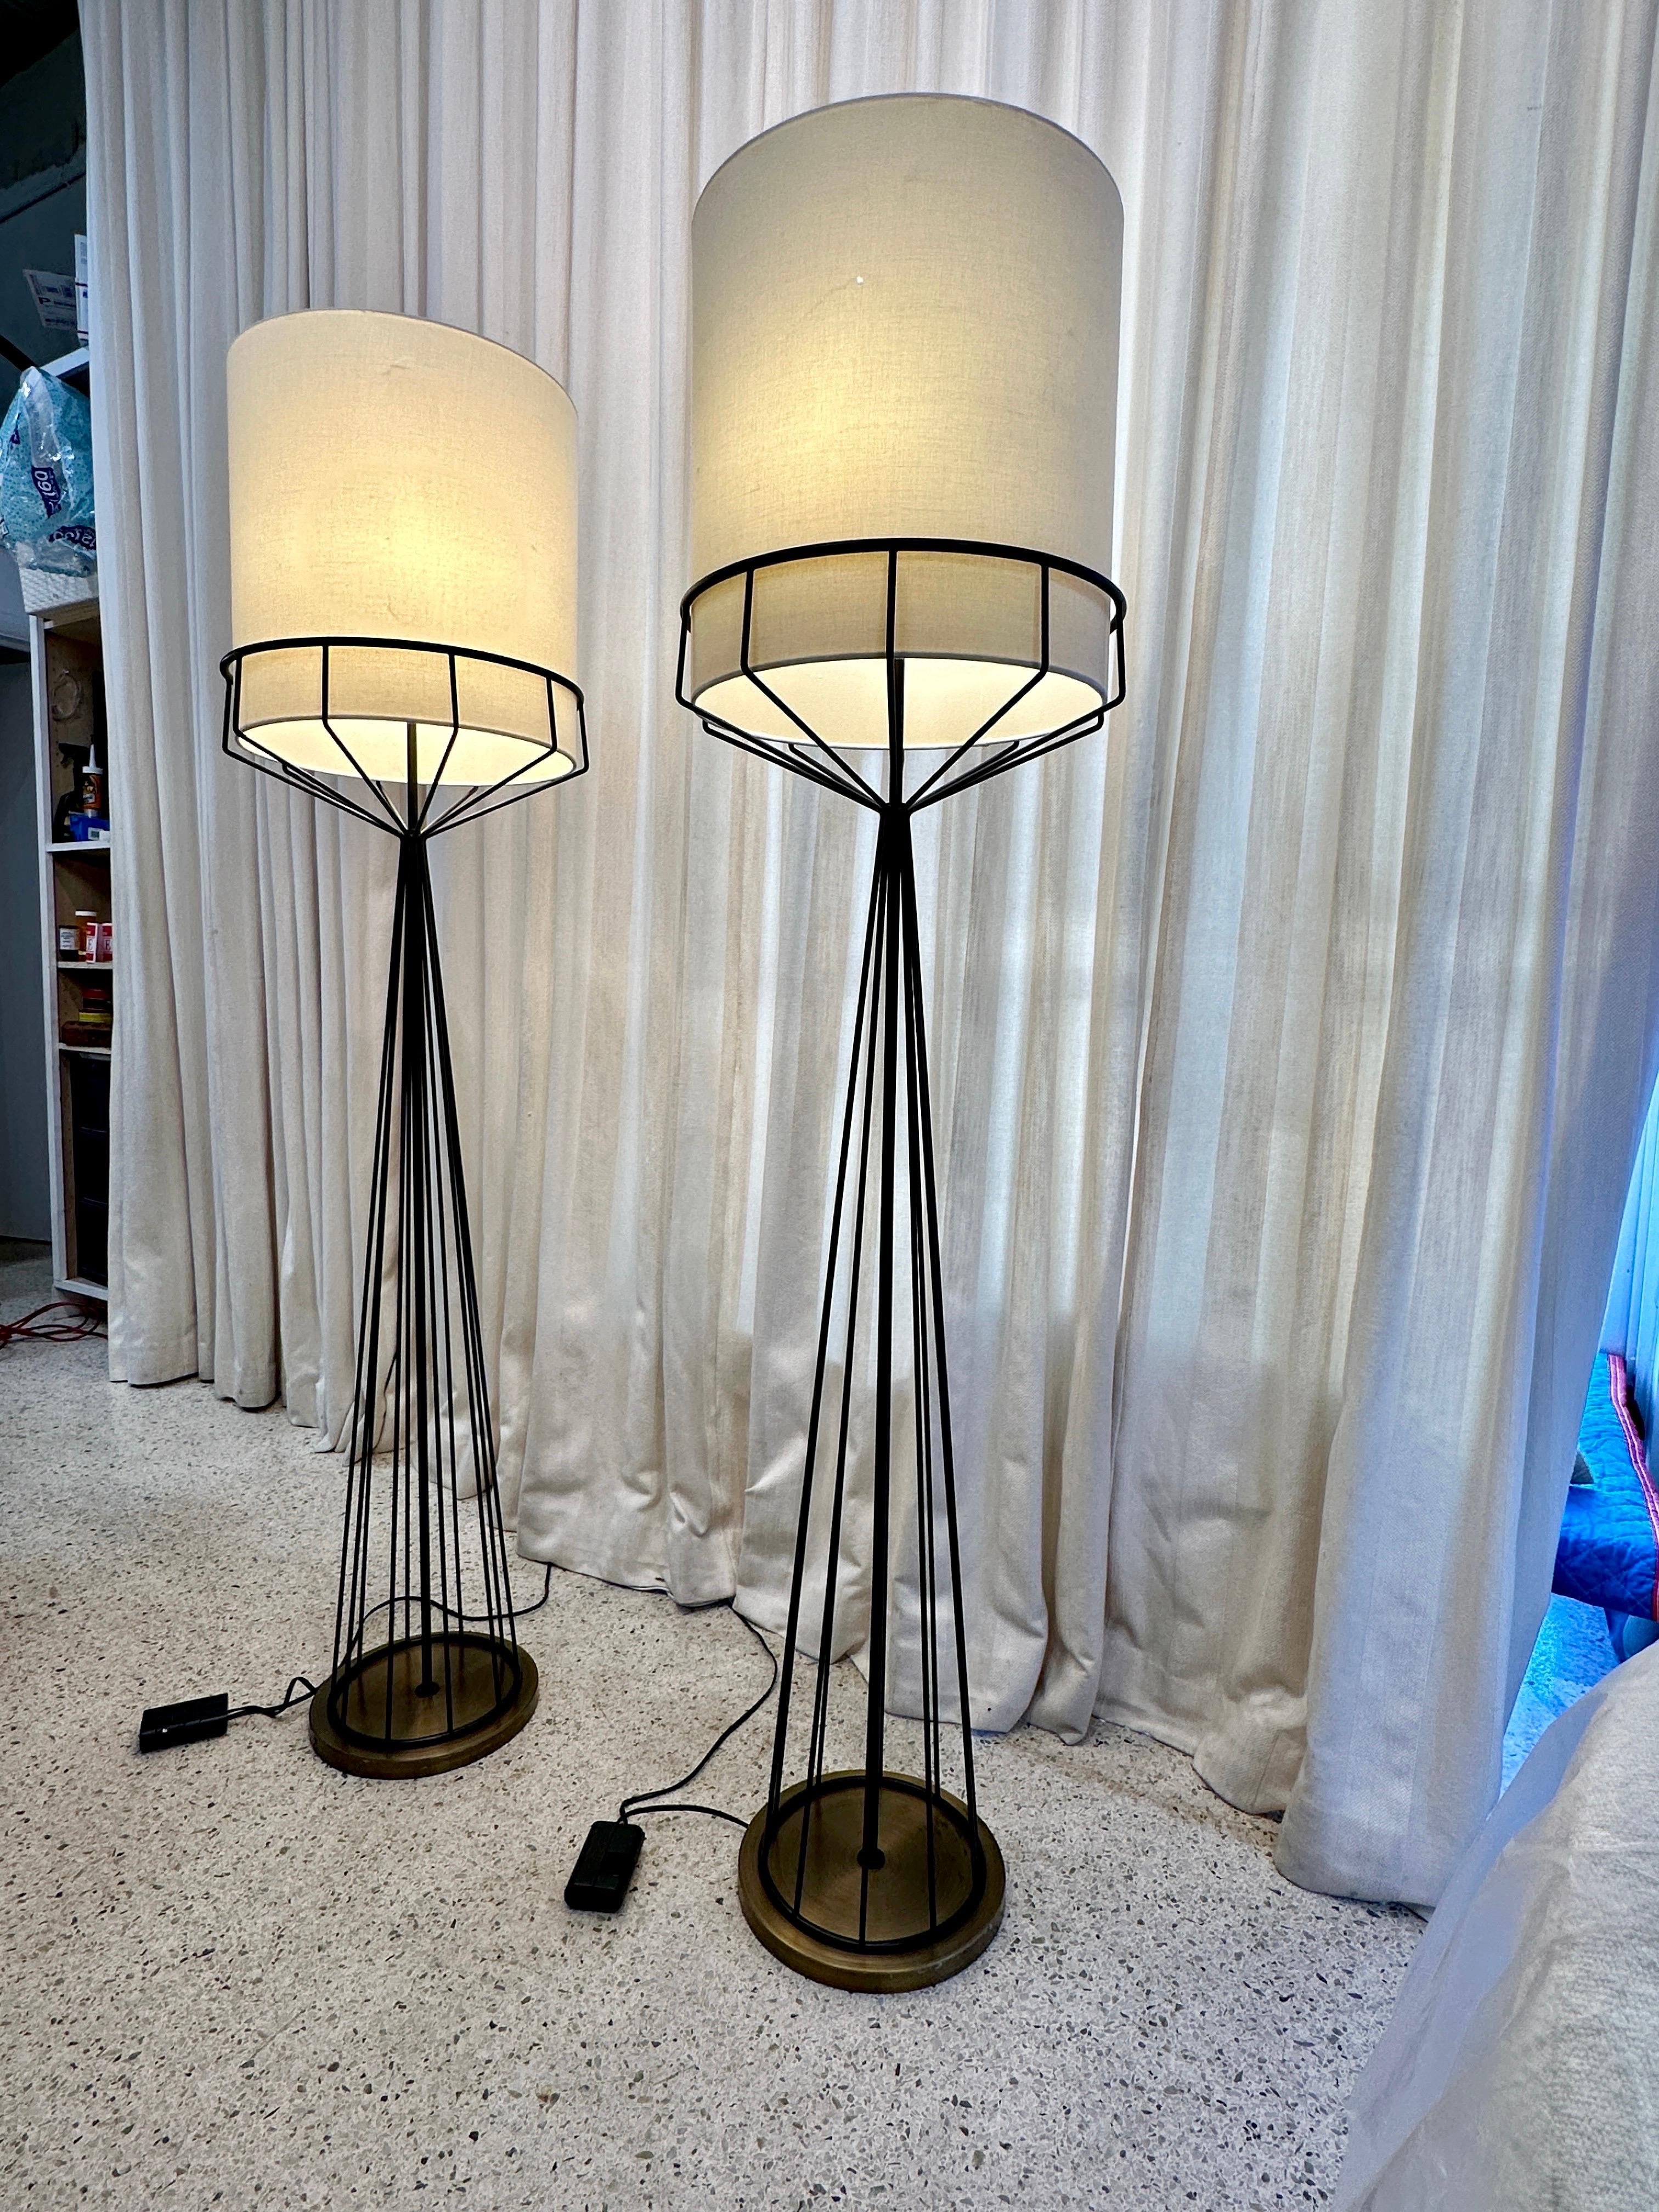 This lovely Pair of Tony Paul original design floor lamps were custom re-made in the 90's for an important Miami Hotel by HB Architectural Lighting in New York. 100% Made in USA with exceptional quality - very heavy weight.  Featuring double sockets